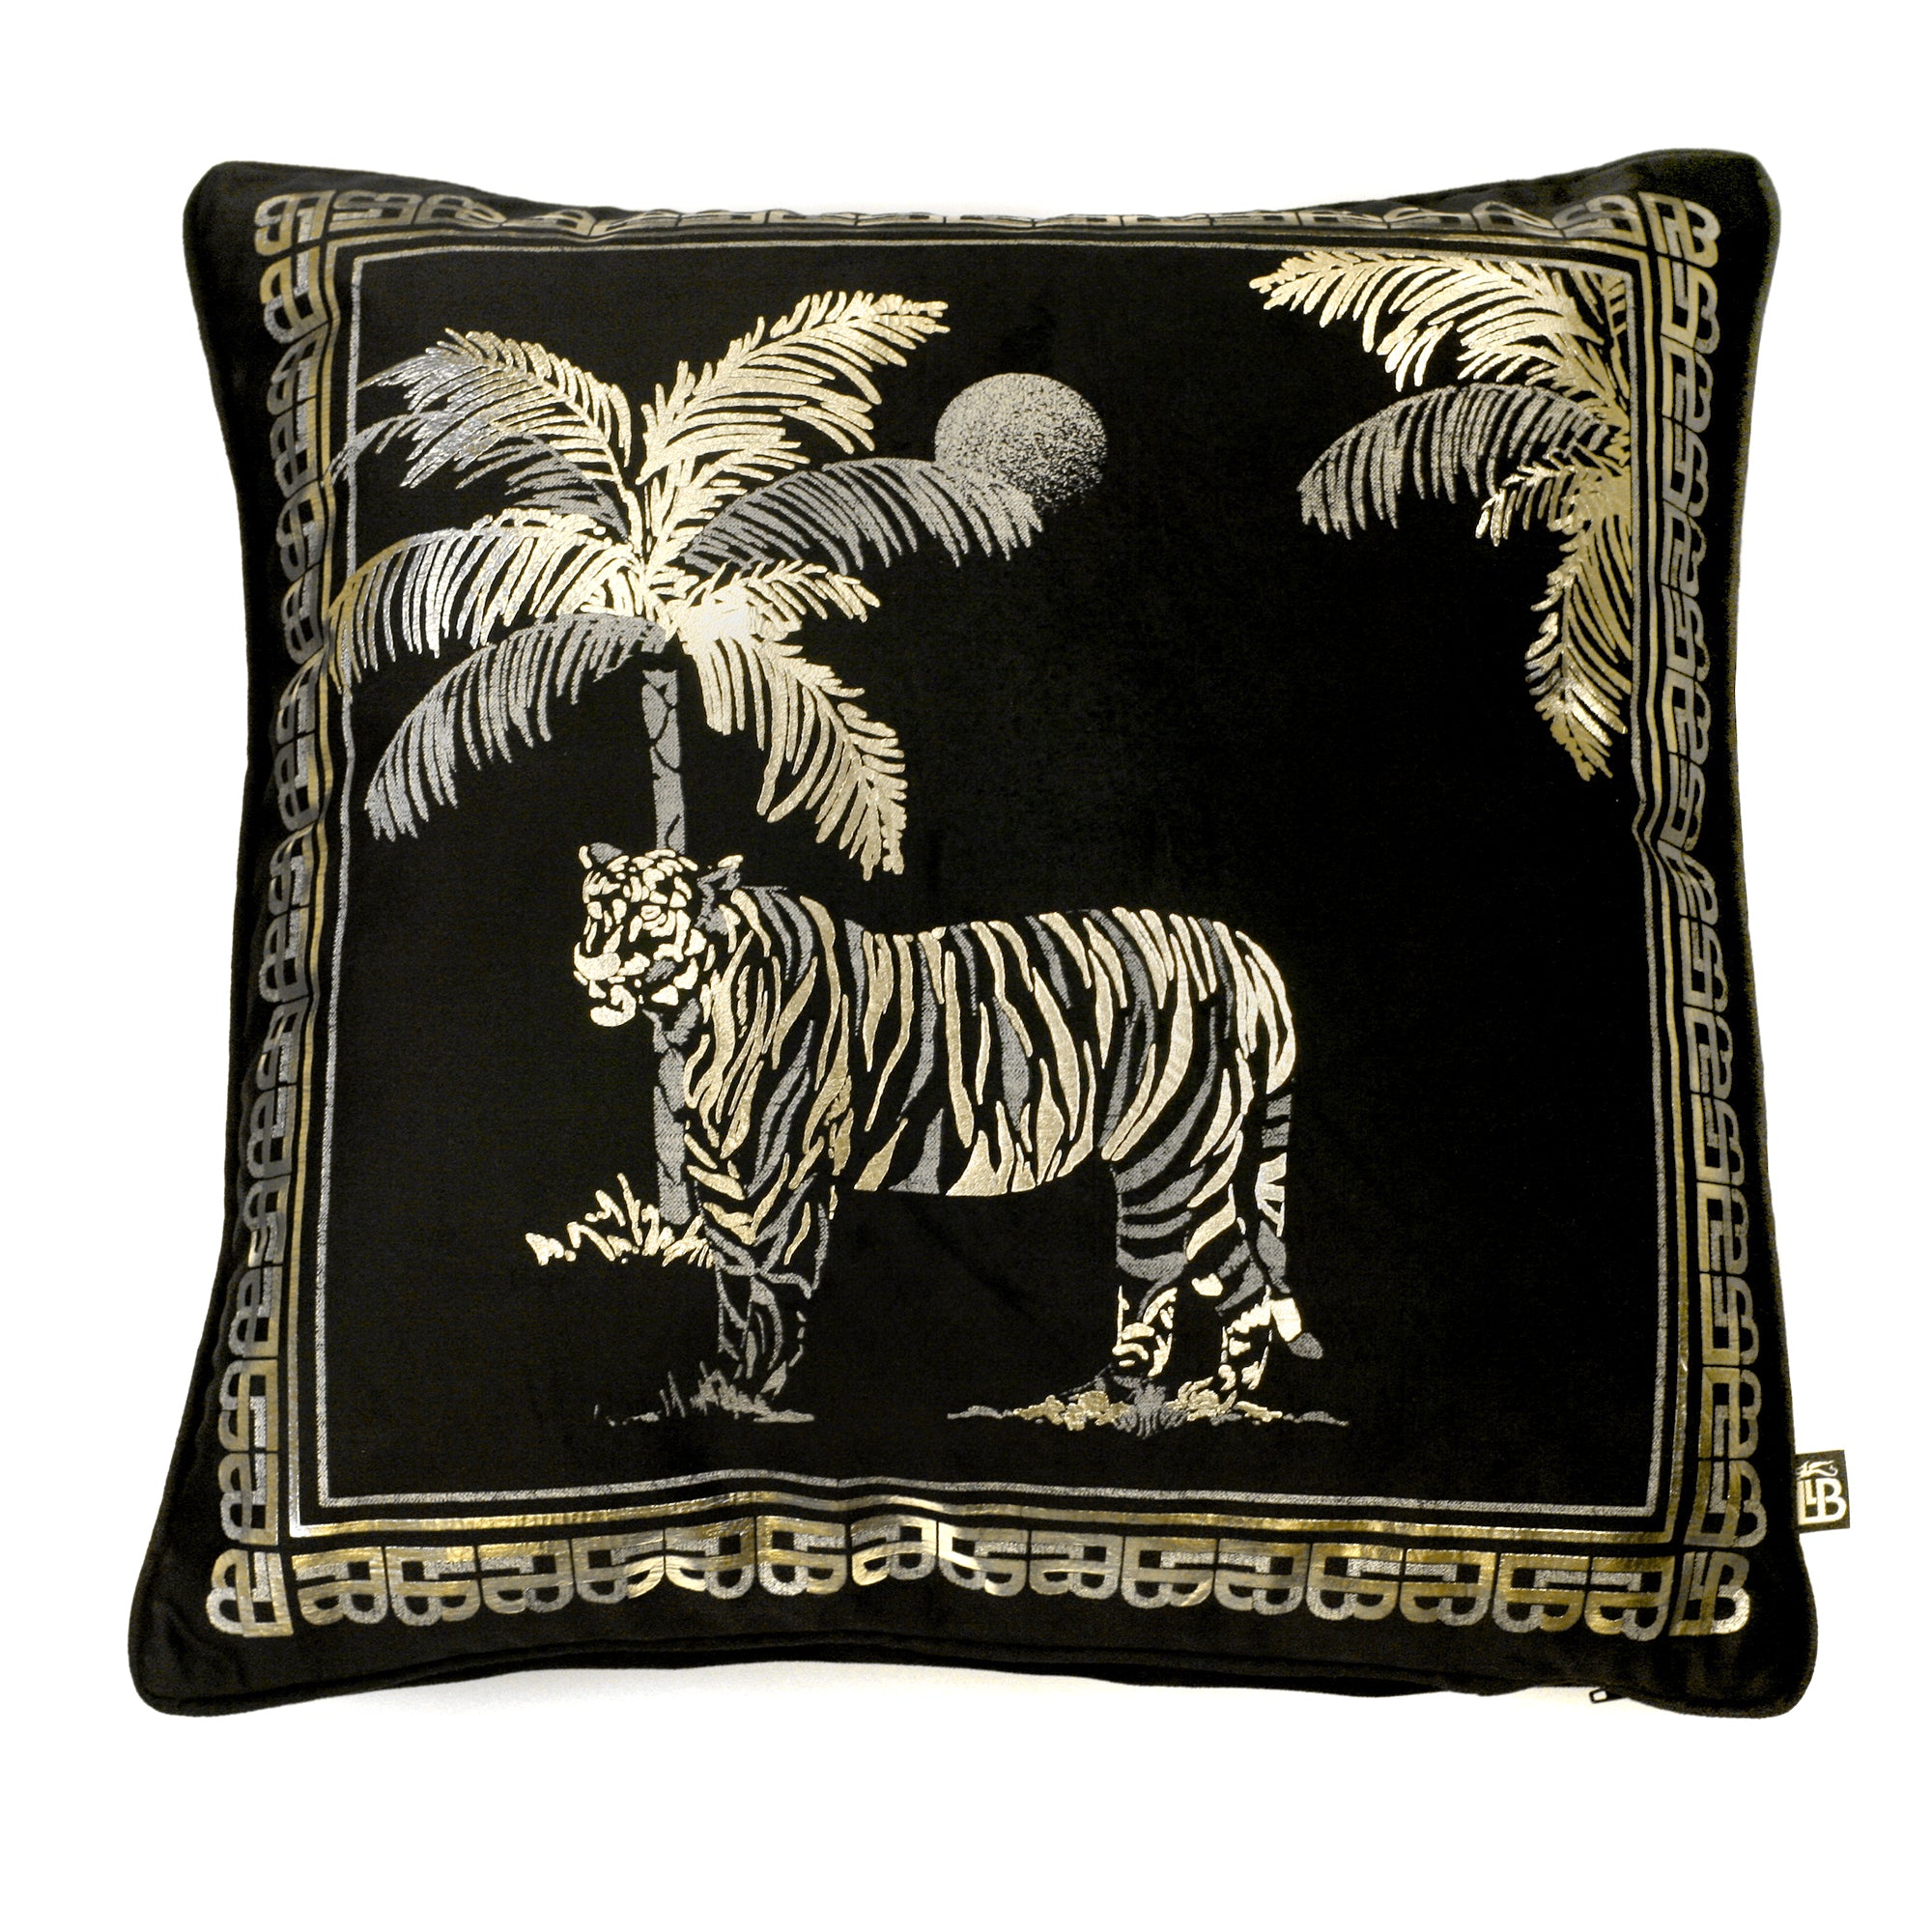 Tiger Tiger - Luxury Velvet Filled Cushion by Laurence Llewelyn-Bowen